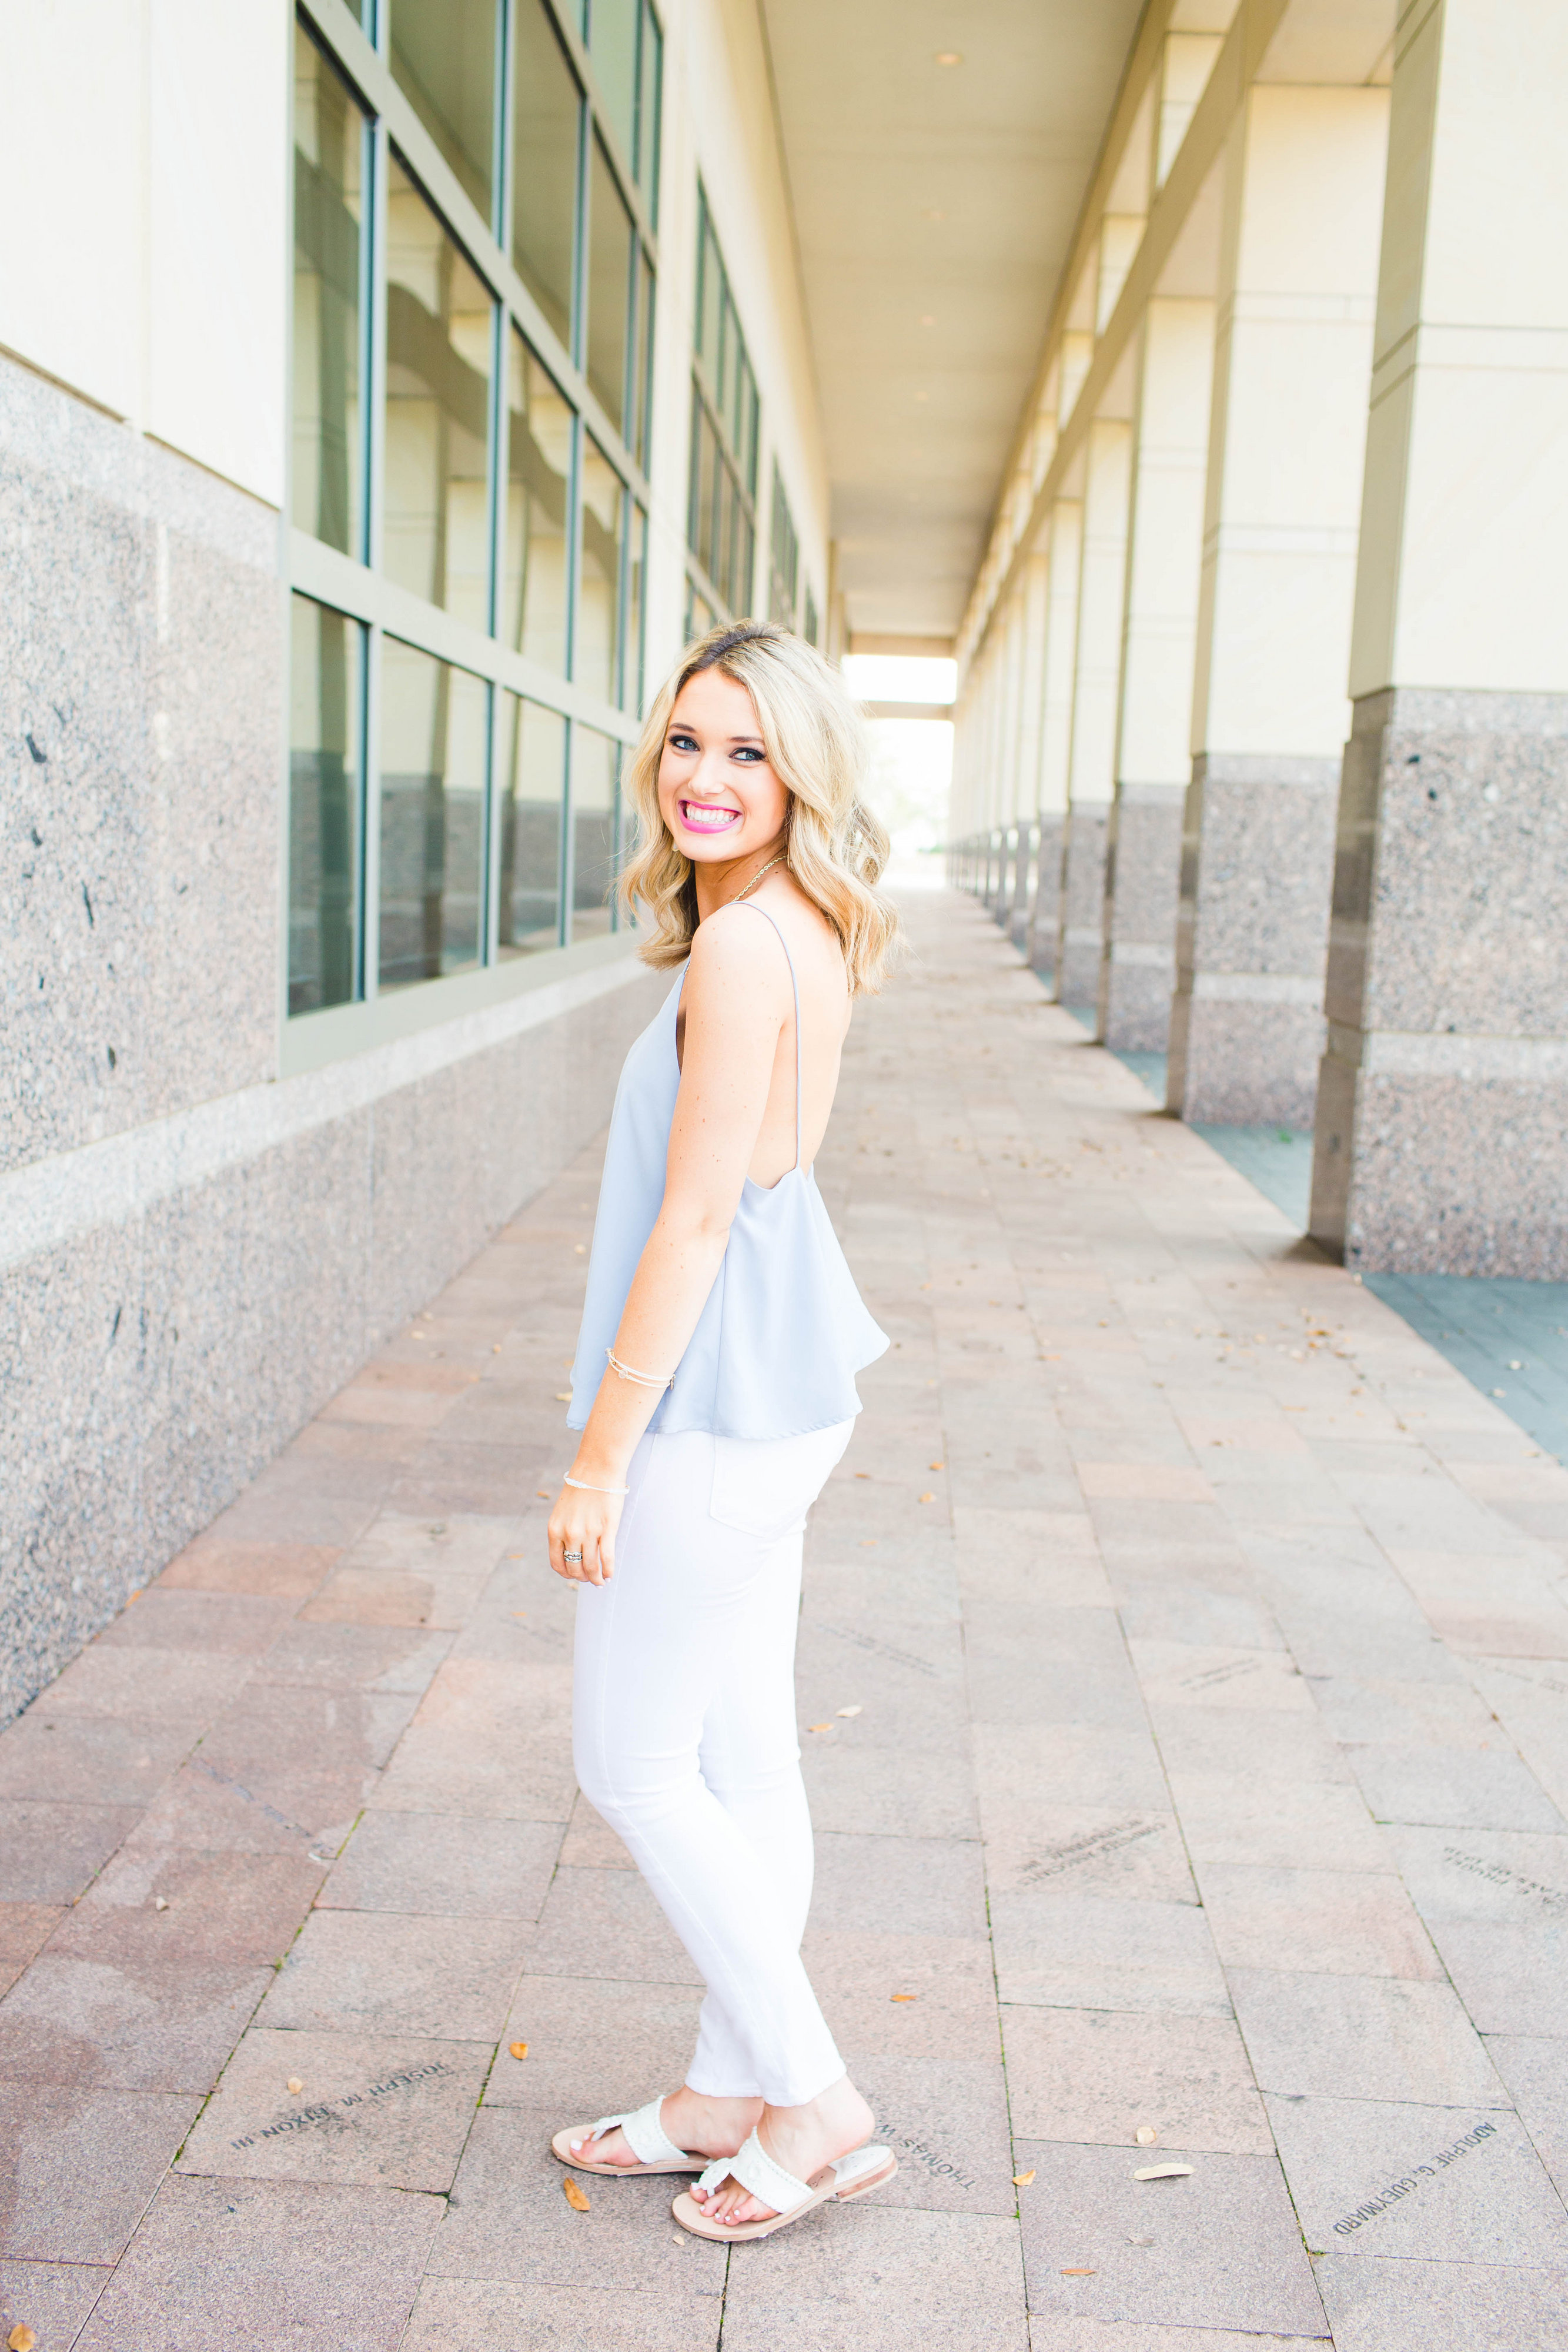 View More: http://wgilmerphotography.pass.us/blog-2-emily